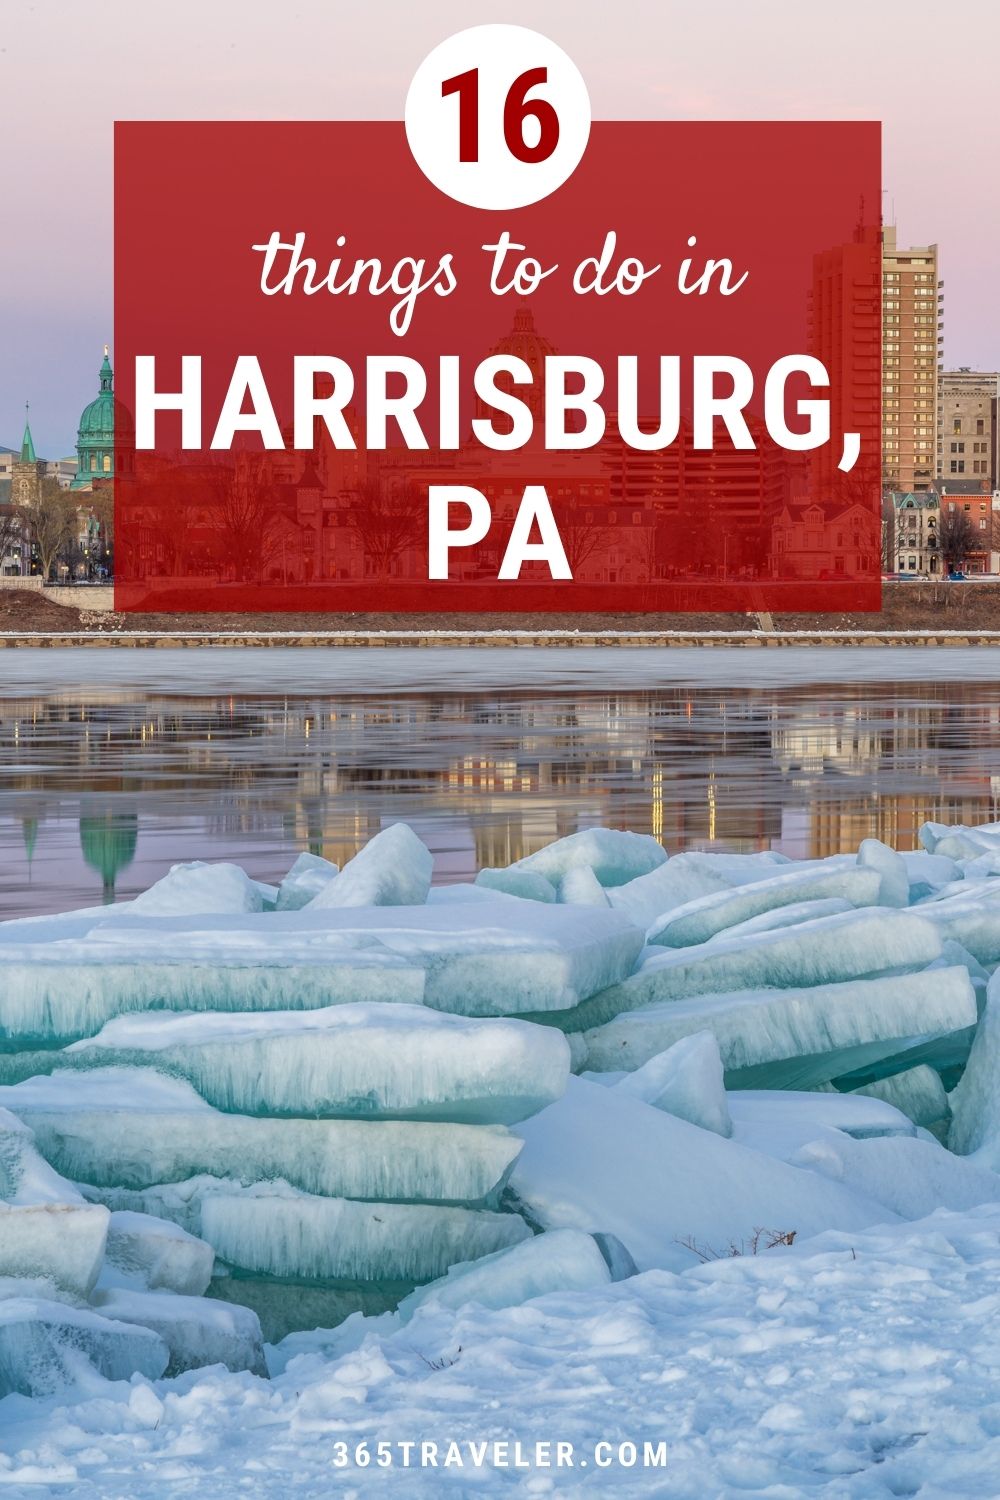 16 THINGS TO DO IN HARRISBURG PA YOU CAN'T MISS